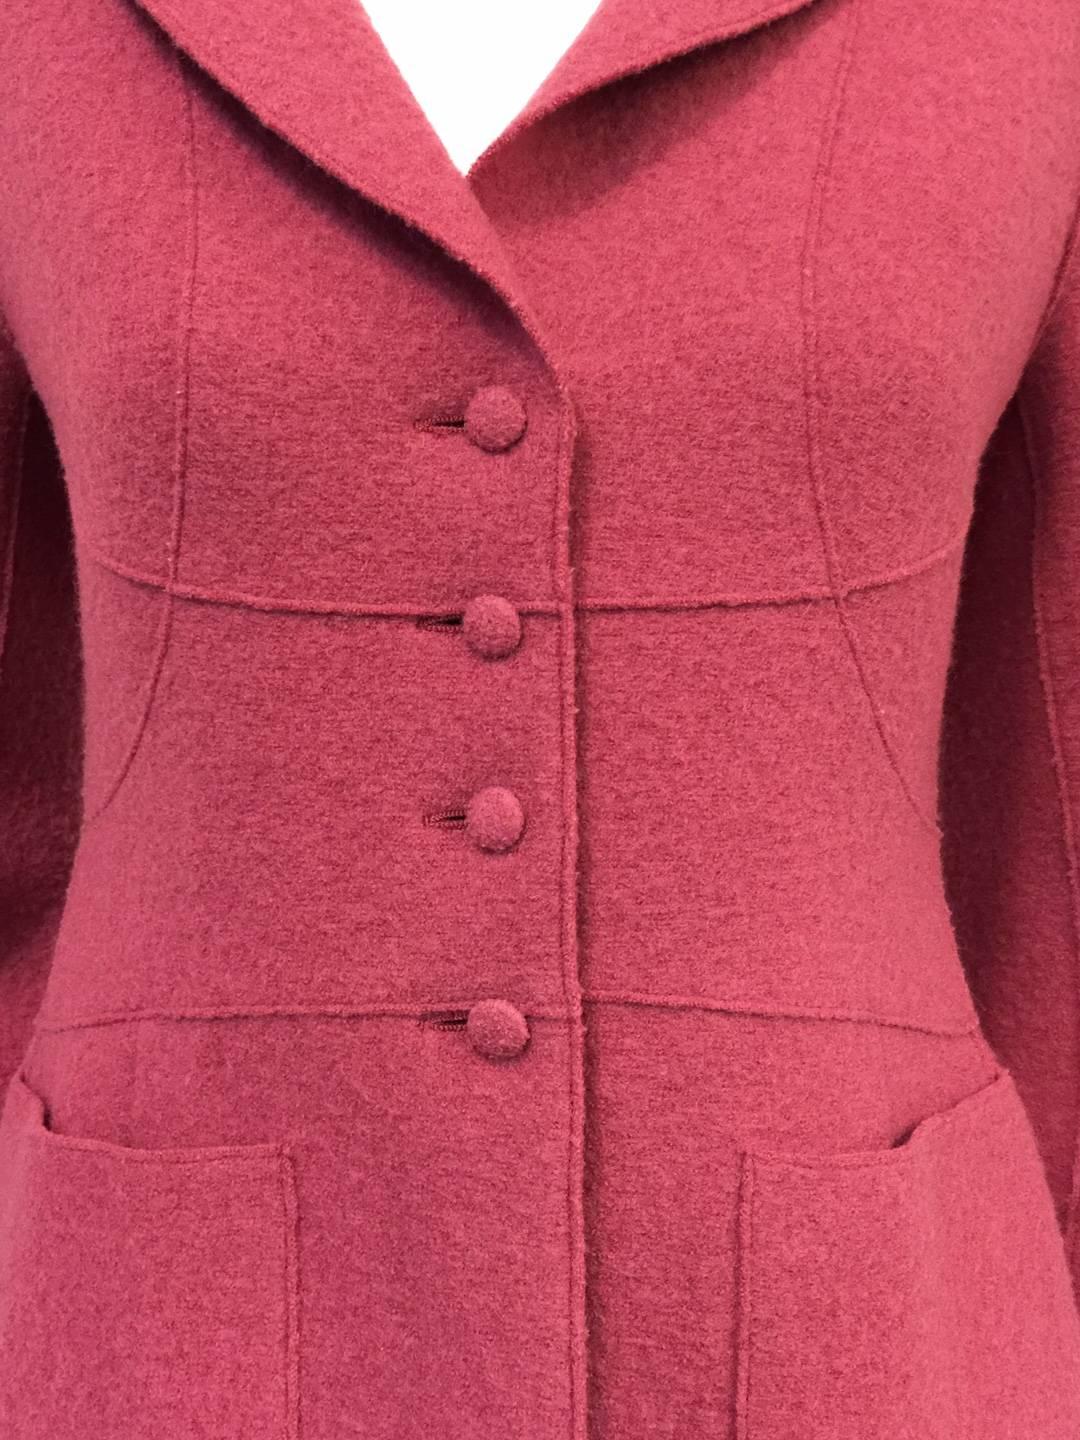 Women's Chanel Fall 1999 Berry Boiled Wool Fitted Jacket  For Sale